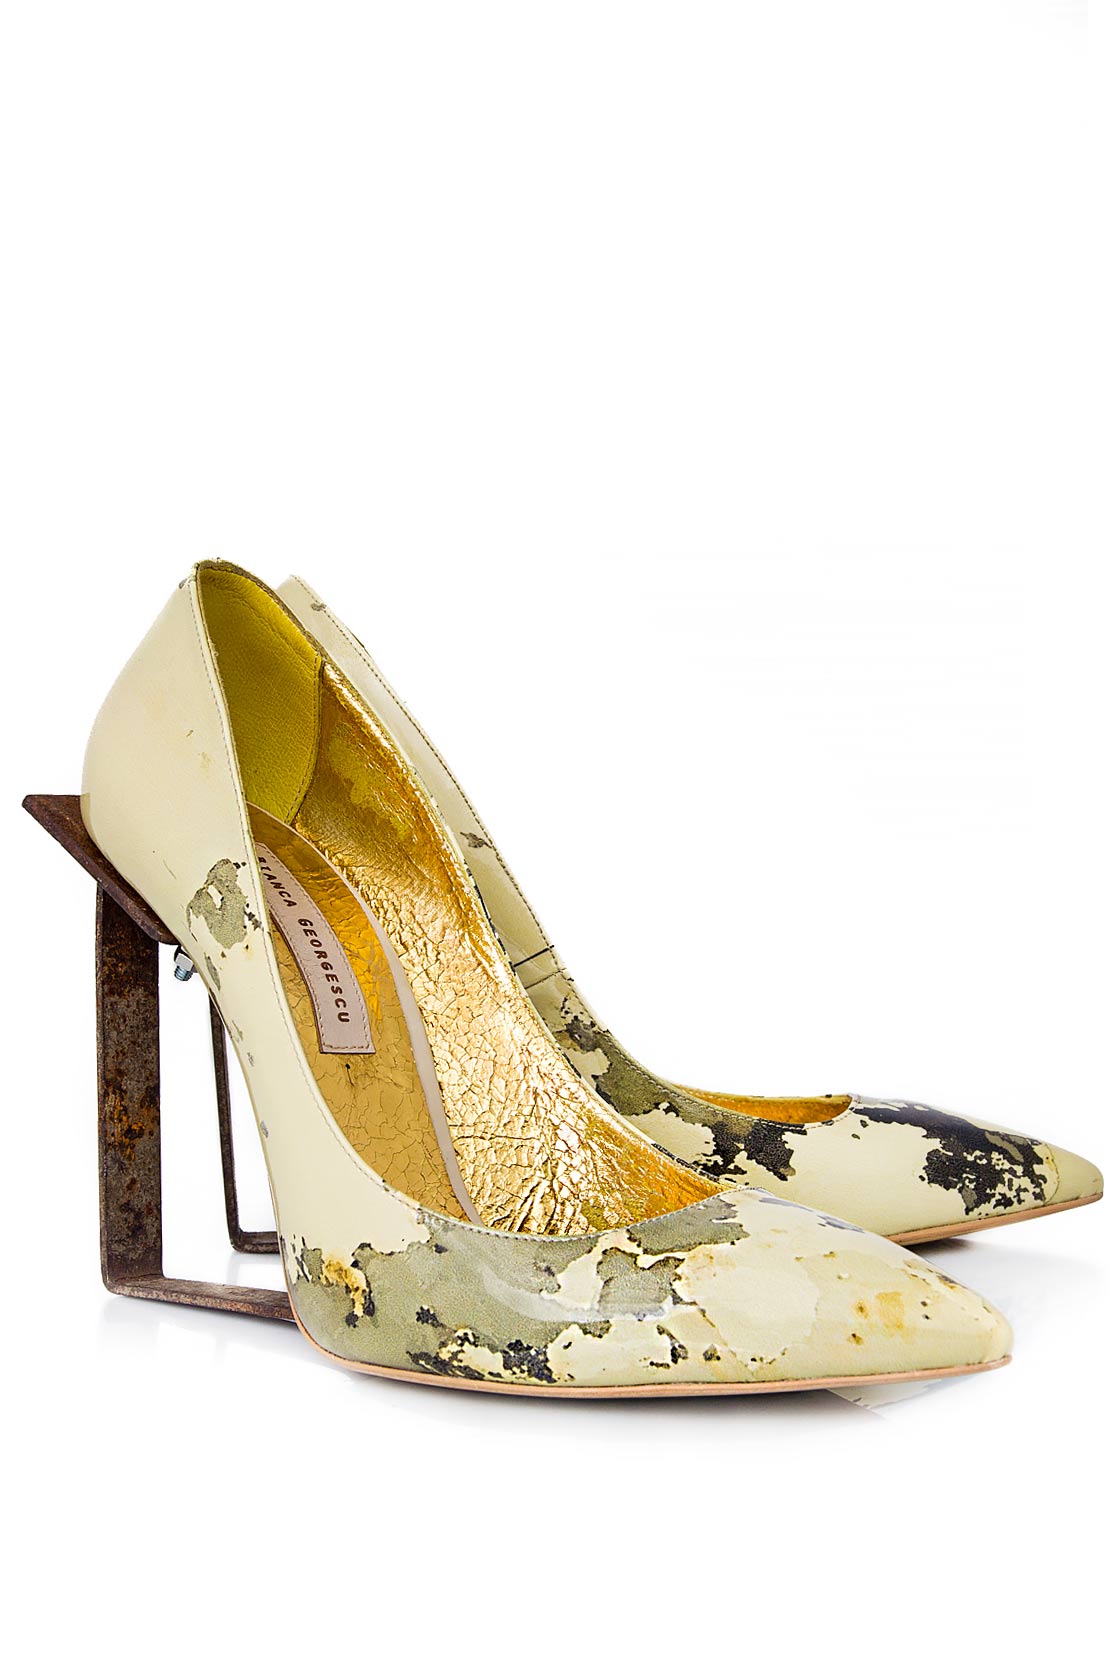 'Wolfgran' printed leather pumps Bianca Georgescu image 1